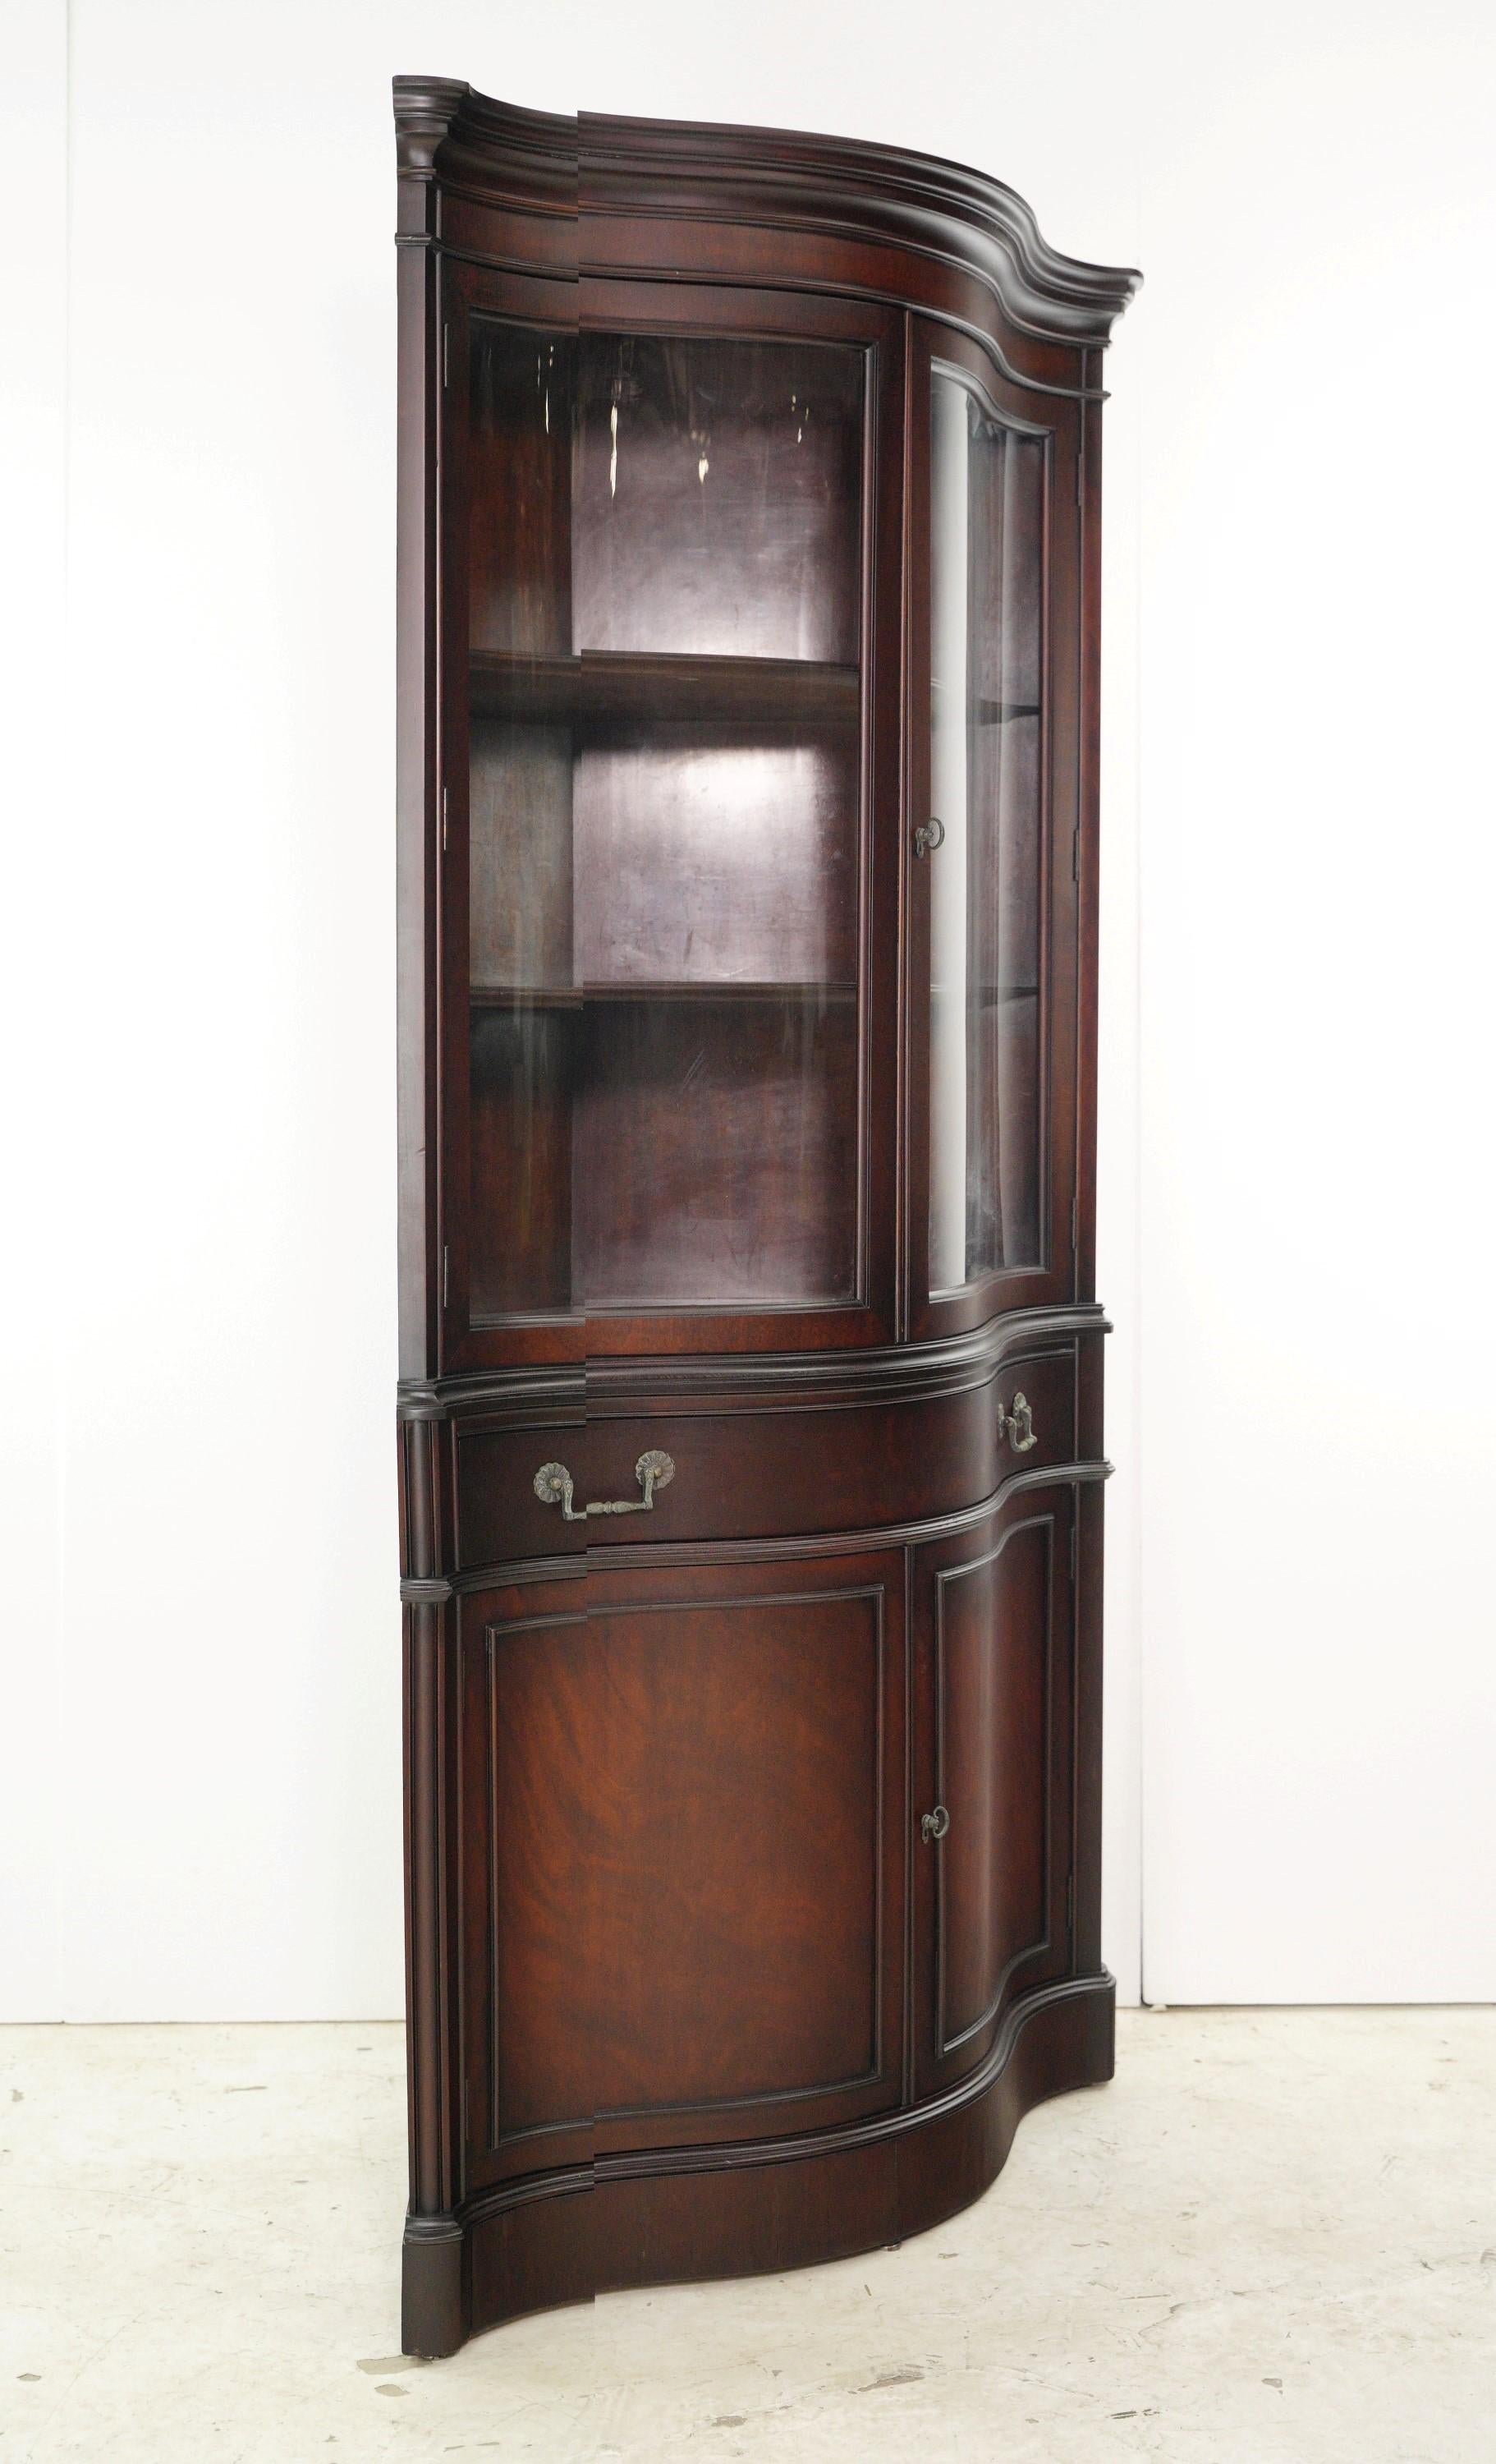 This Traditional curved glass doors corner cabinet is a timeless beauty. Crafted from mahogany, it features elegant curved glass front doors, adding sophistication and showcasing cherished items in a space saving corner design. This also features